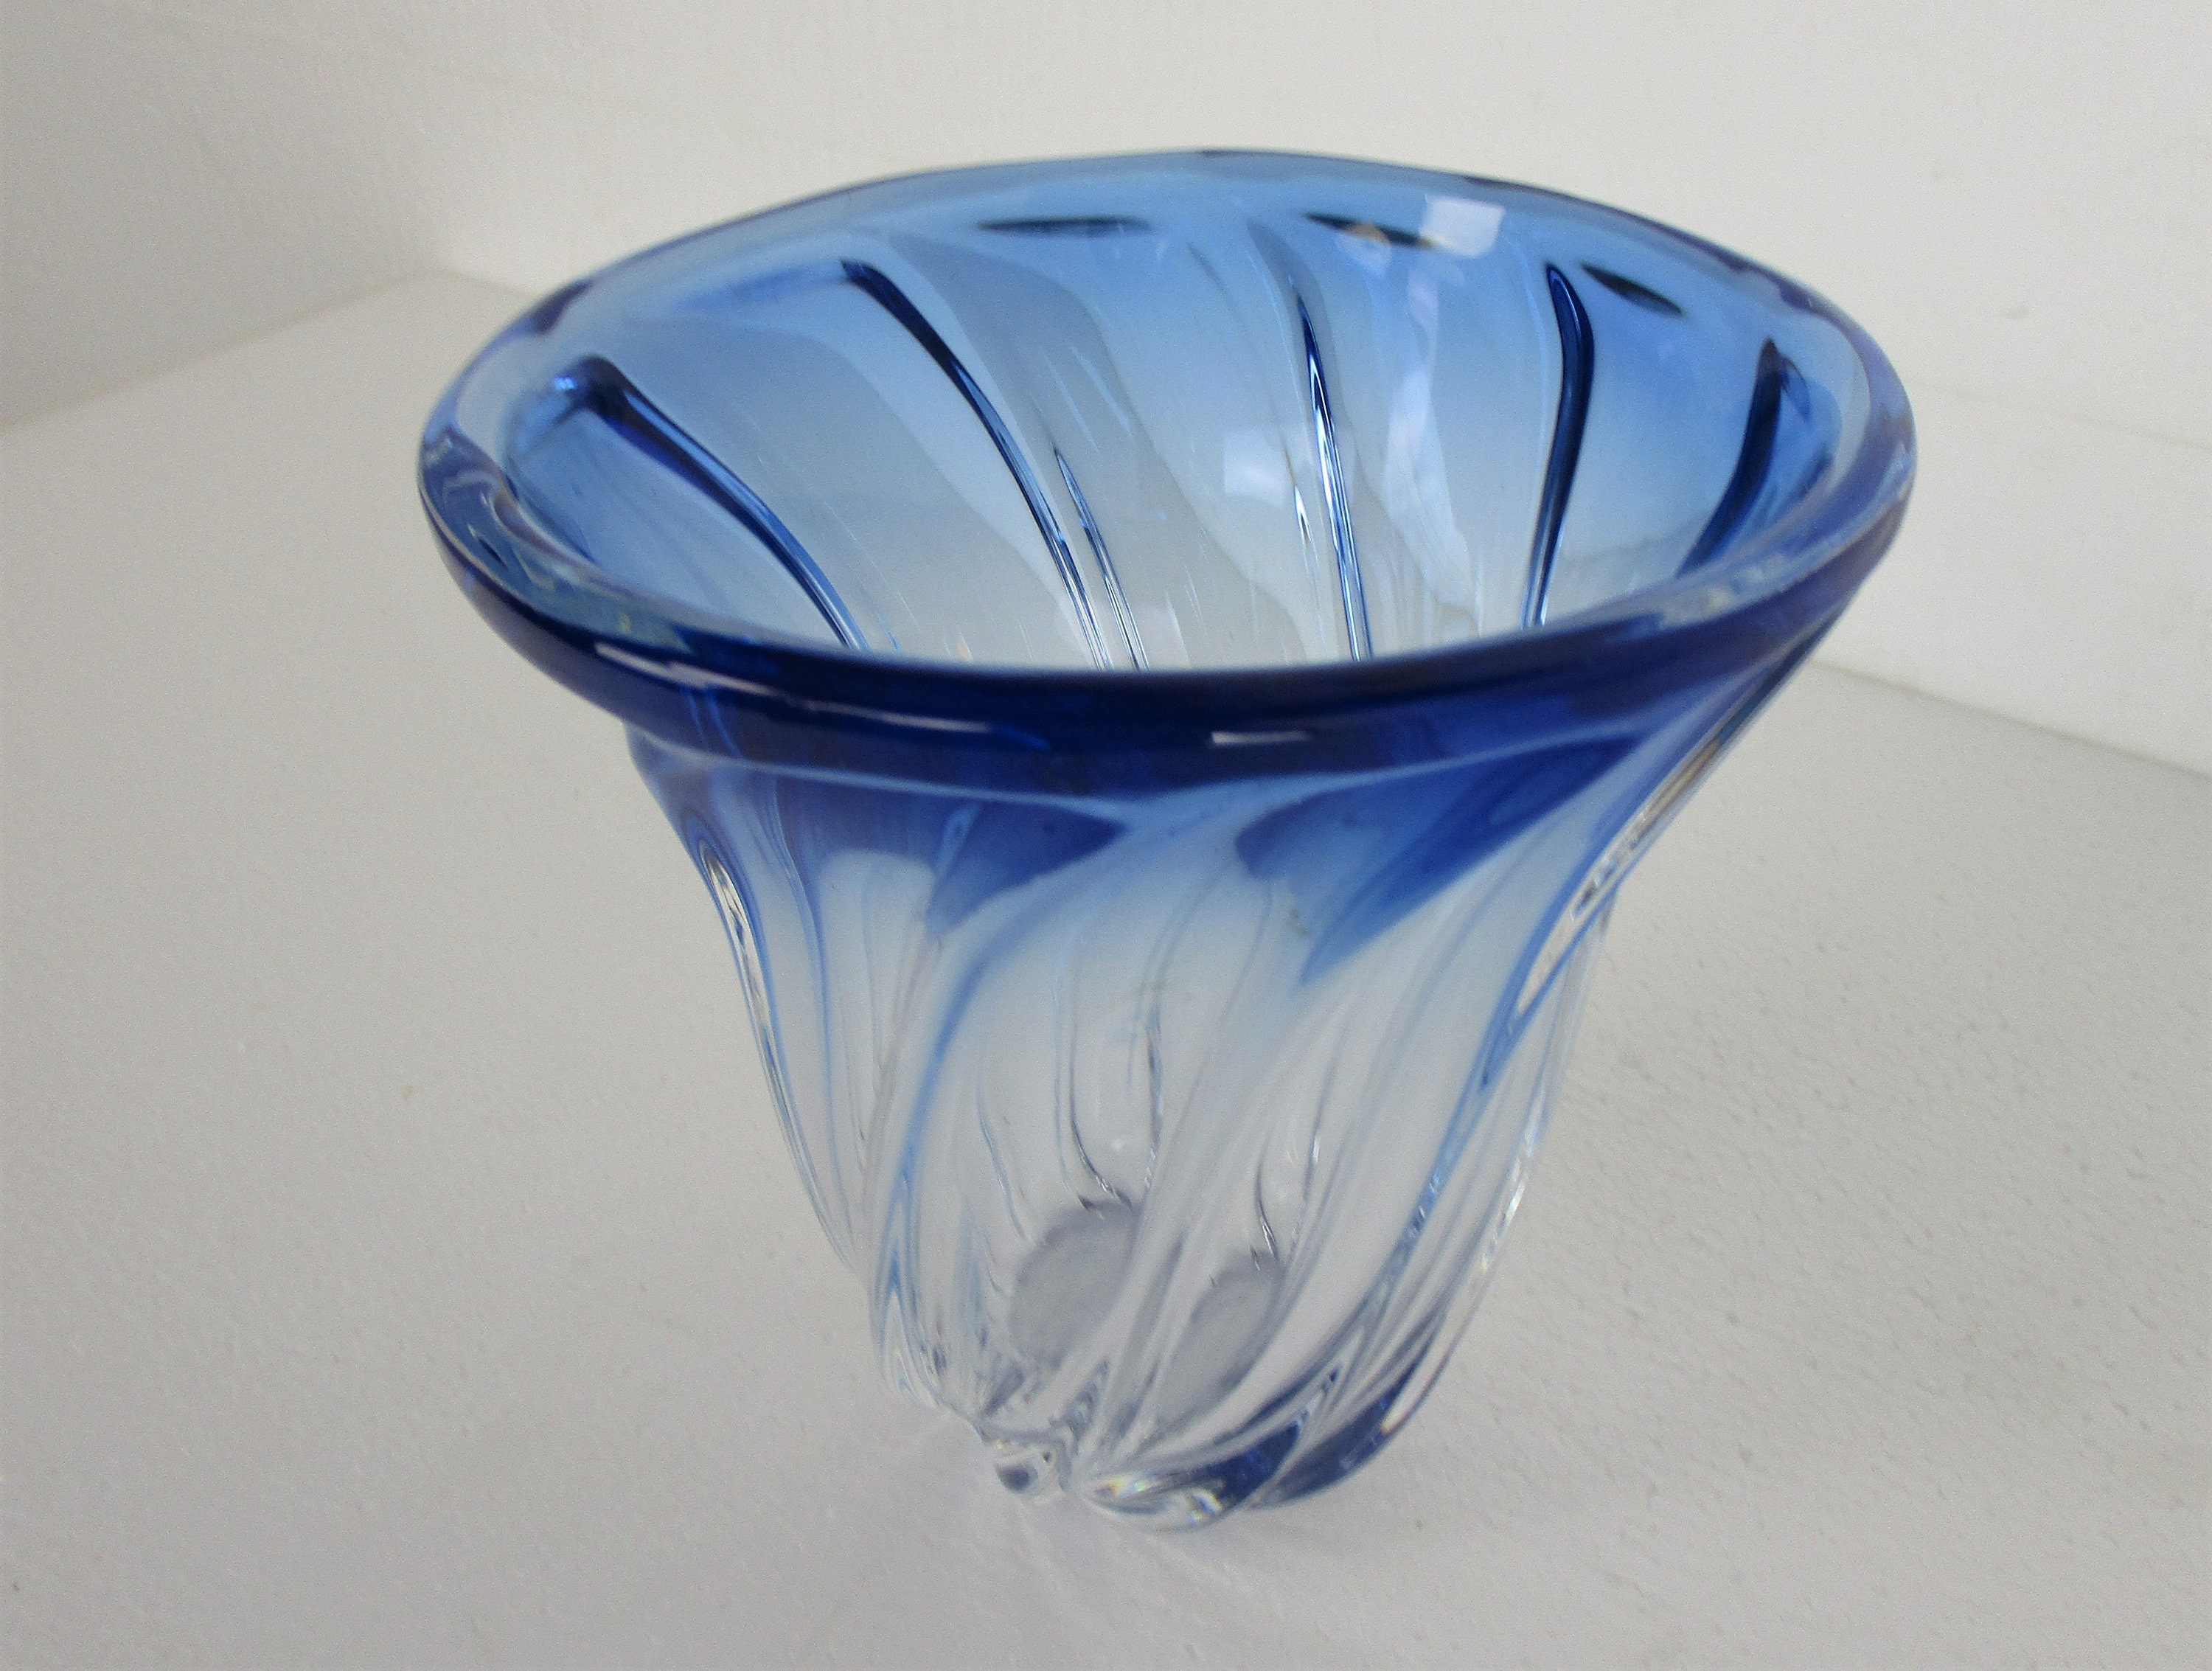 St Twisted Deco - Val in Vase Collectors Lambert glass House Clear Art Blue art the Marked Heavy Glass to Cobalt